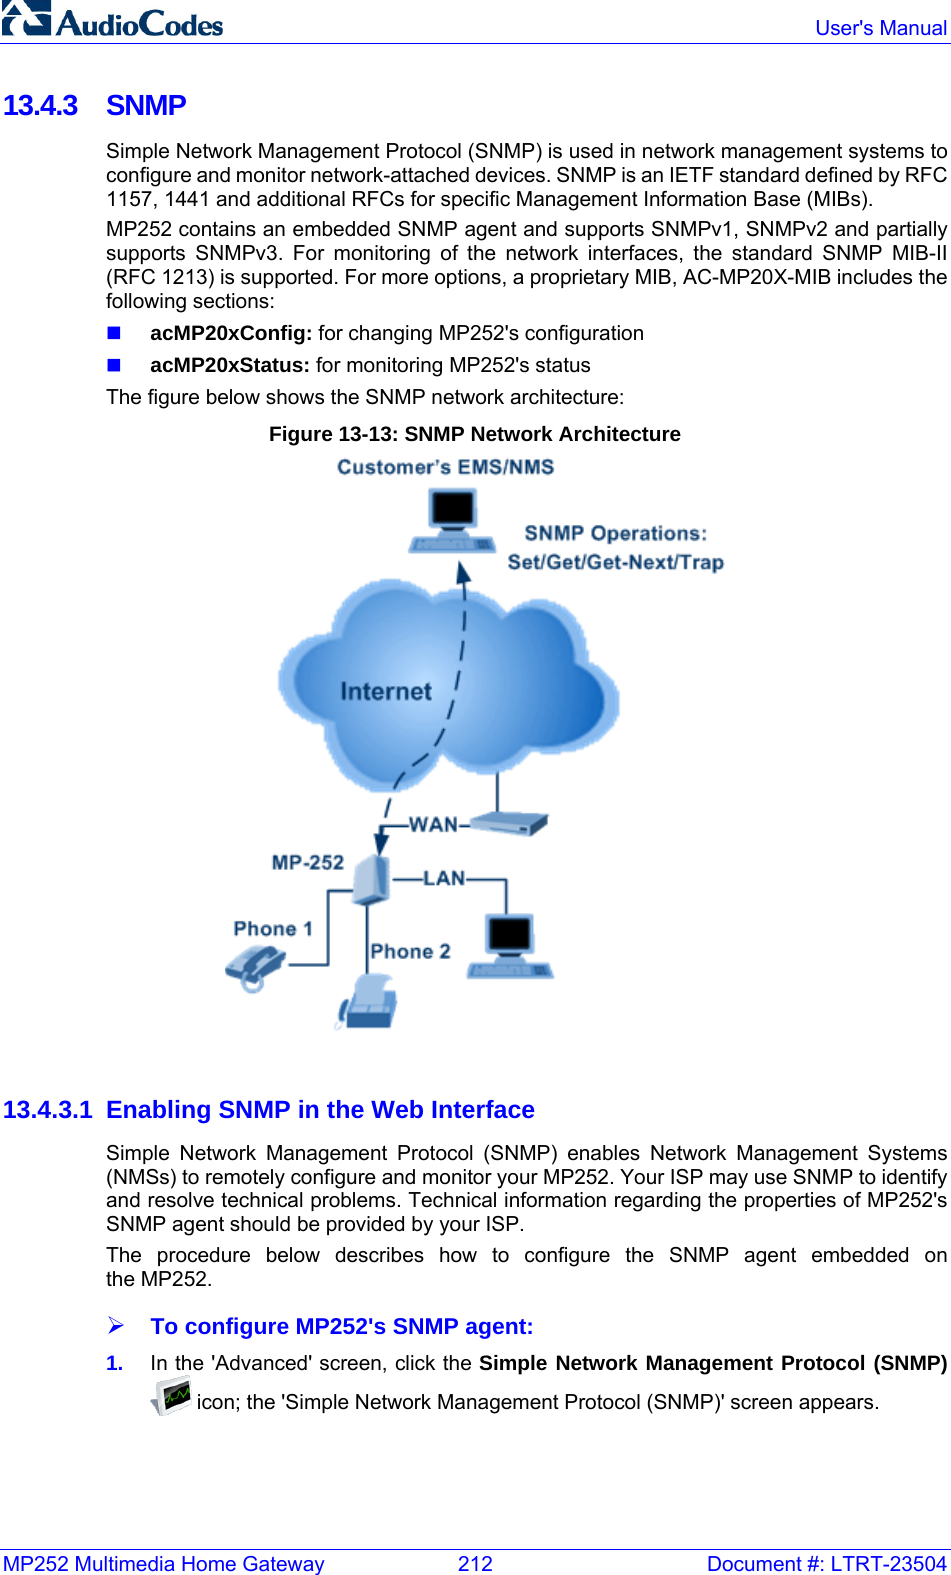 MP252 Multimedia Home Gateway  212  Document #: LTRT-23504  User&apos;s Manual  13.4.3 SNMP Simple Network Management Protocol (SNMP) is used in network management systems to configure and monitor network-attached devices. SNMP is an IETF standard defined by RFC 1157, 1441 and additional RFCs for specific Management Information Base (MIBs). MP252 contains an embedded SNMP agent and supports SNMPv1, SNMPv2 and partially supports SNMPv3. For monitoring of the network interfaces, the standard SNMP MIB-II (RFC 1213) is supported. For more options, a proprietary MIB, AC-MP20X-MIB includes the following sections:  acMP20xConfig: for changing MP252&apos;s configuration  acMP20xStatus: for monitoring MP252&apos;s status The figure below shows the SNMP network architecture: Figure 13-13: SNMP Network Architecture   13.4.3.1  Enabling SNMP in the Web Interface Simple Network Management Protocol (SNMP) enables Network Management Systems (NMSs) to remotely configure and monitor your MP252. Your ISP may use SNMP to identify and resolve technical problems. Technical information regarding the properties of MP252&apos;s SNMP agent should be provided by your ISP. The procedure below describes how to configure the SNMP agent embedded on  the MP252. ¾ To configure MP252&apos;s SNMP agent: 1.  In the &apos;Advanced&apos; screen, click the Simple Network Management Protocol (SNMP)  icon; the &apos;Simple Network Management Protocol (SNMP)&apos; screen appears. 